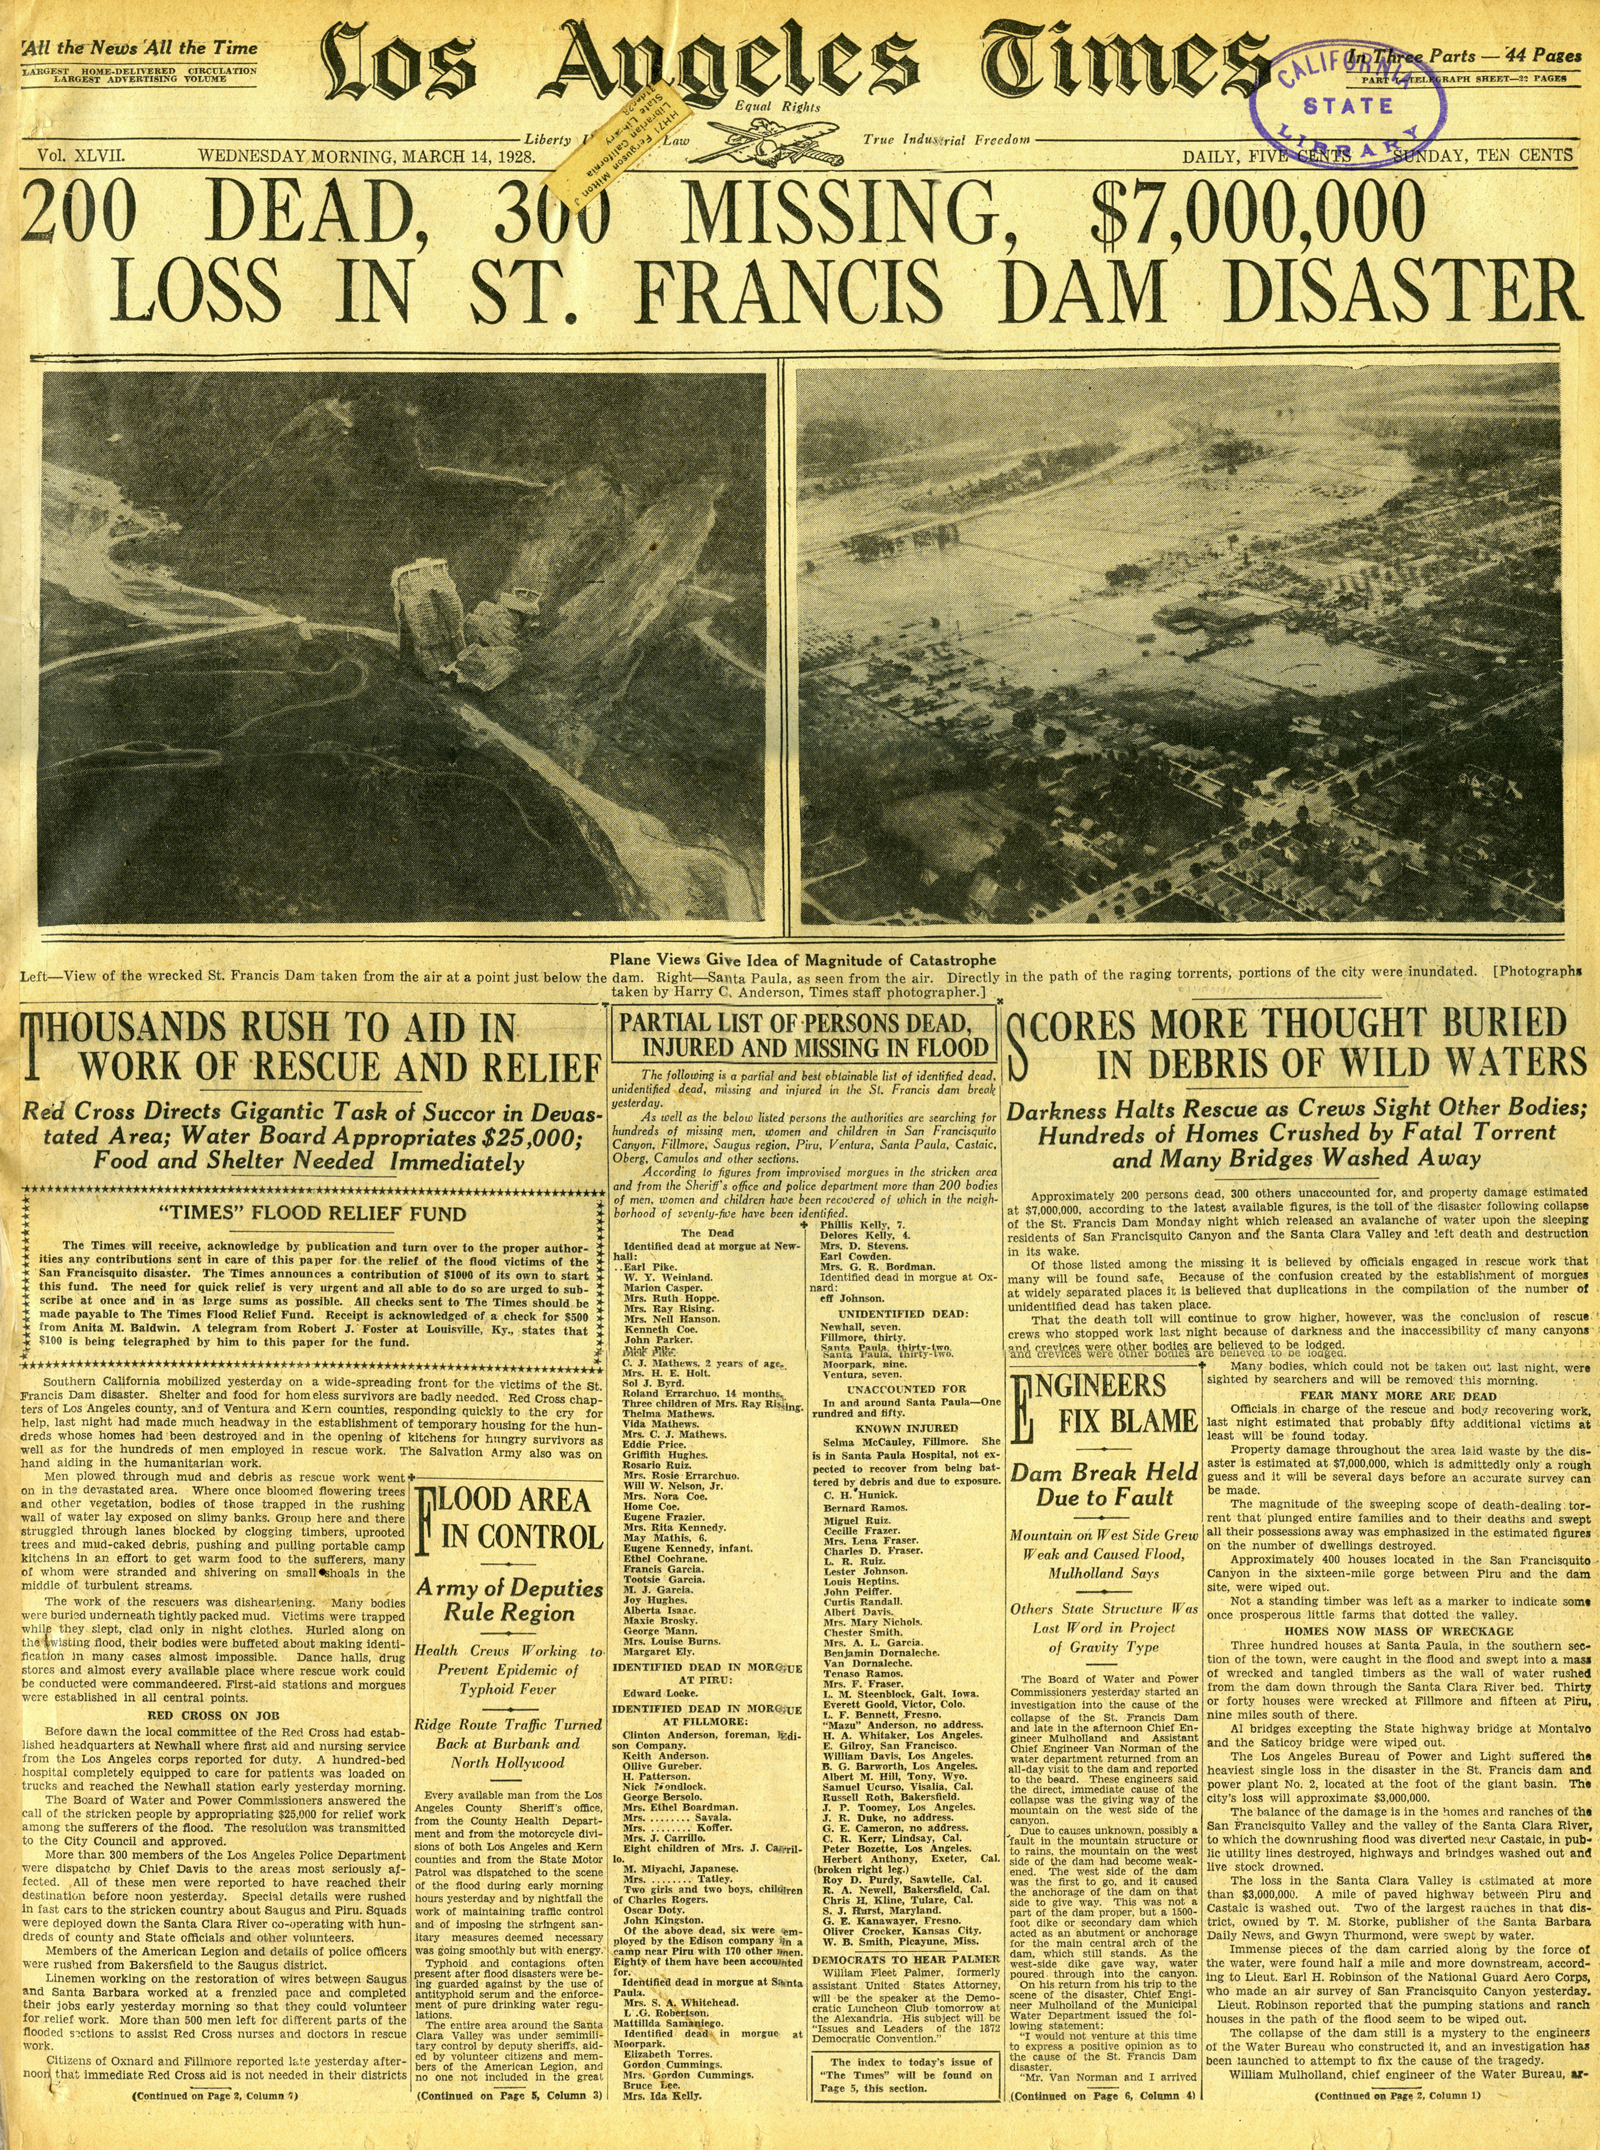 St. Francis Dam Disaster

LOS ANGELES TIMES

Los Angeles, California | Wednesday, March 14, 1928